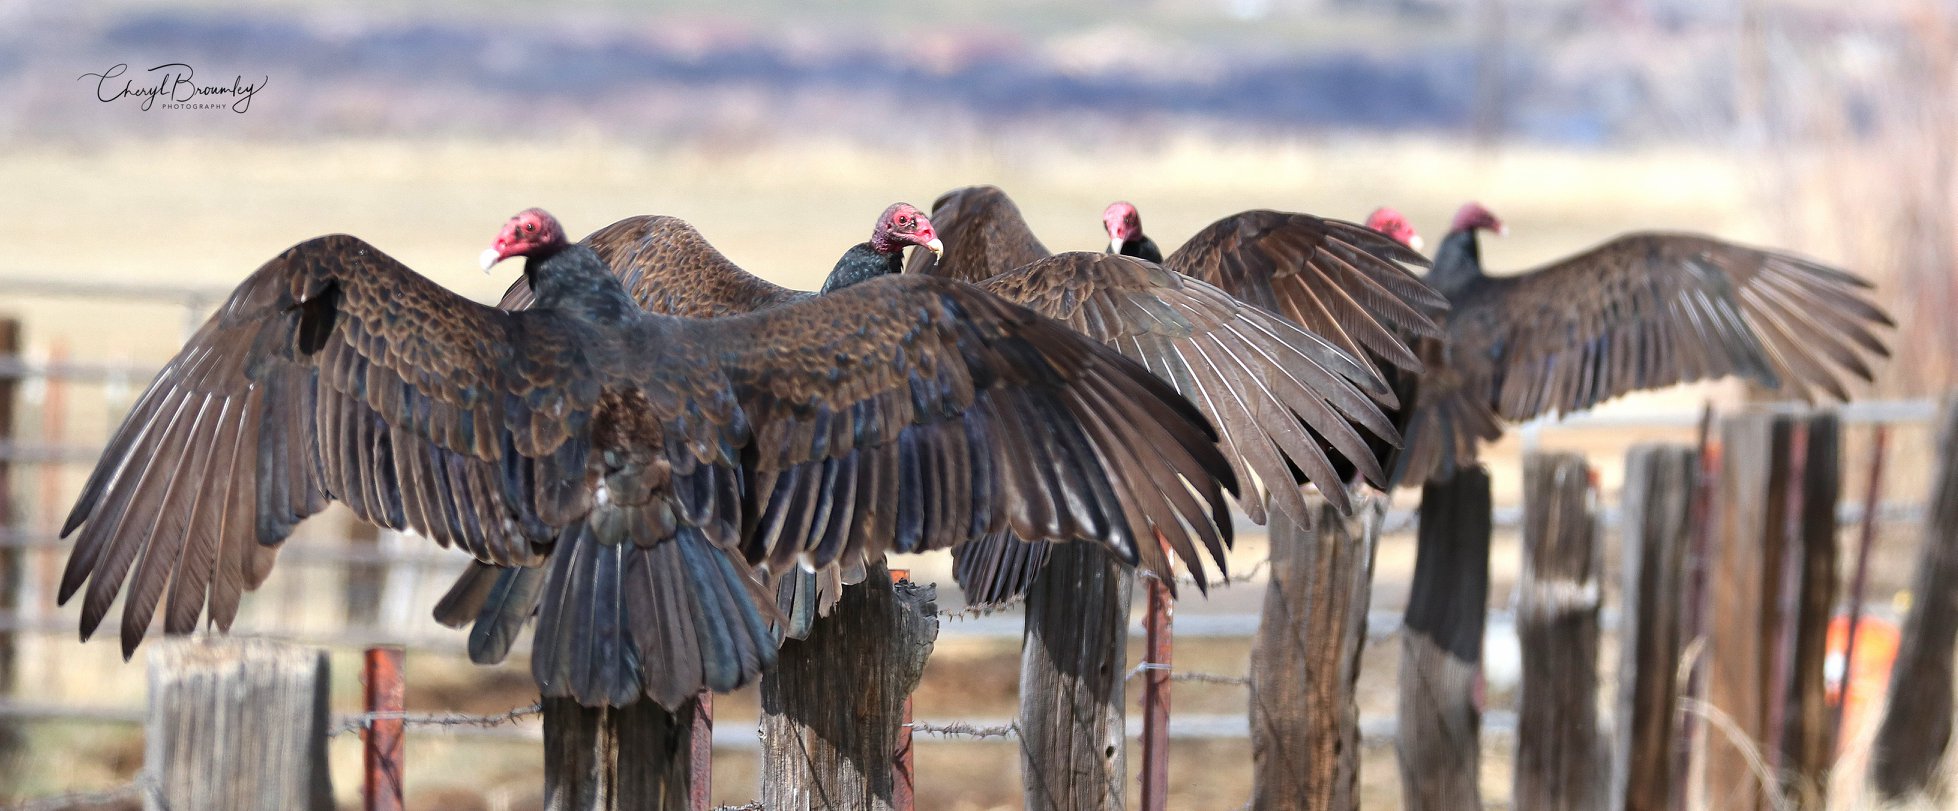 vultures on a fence